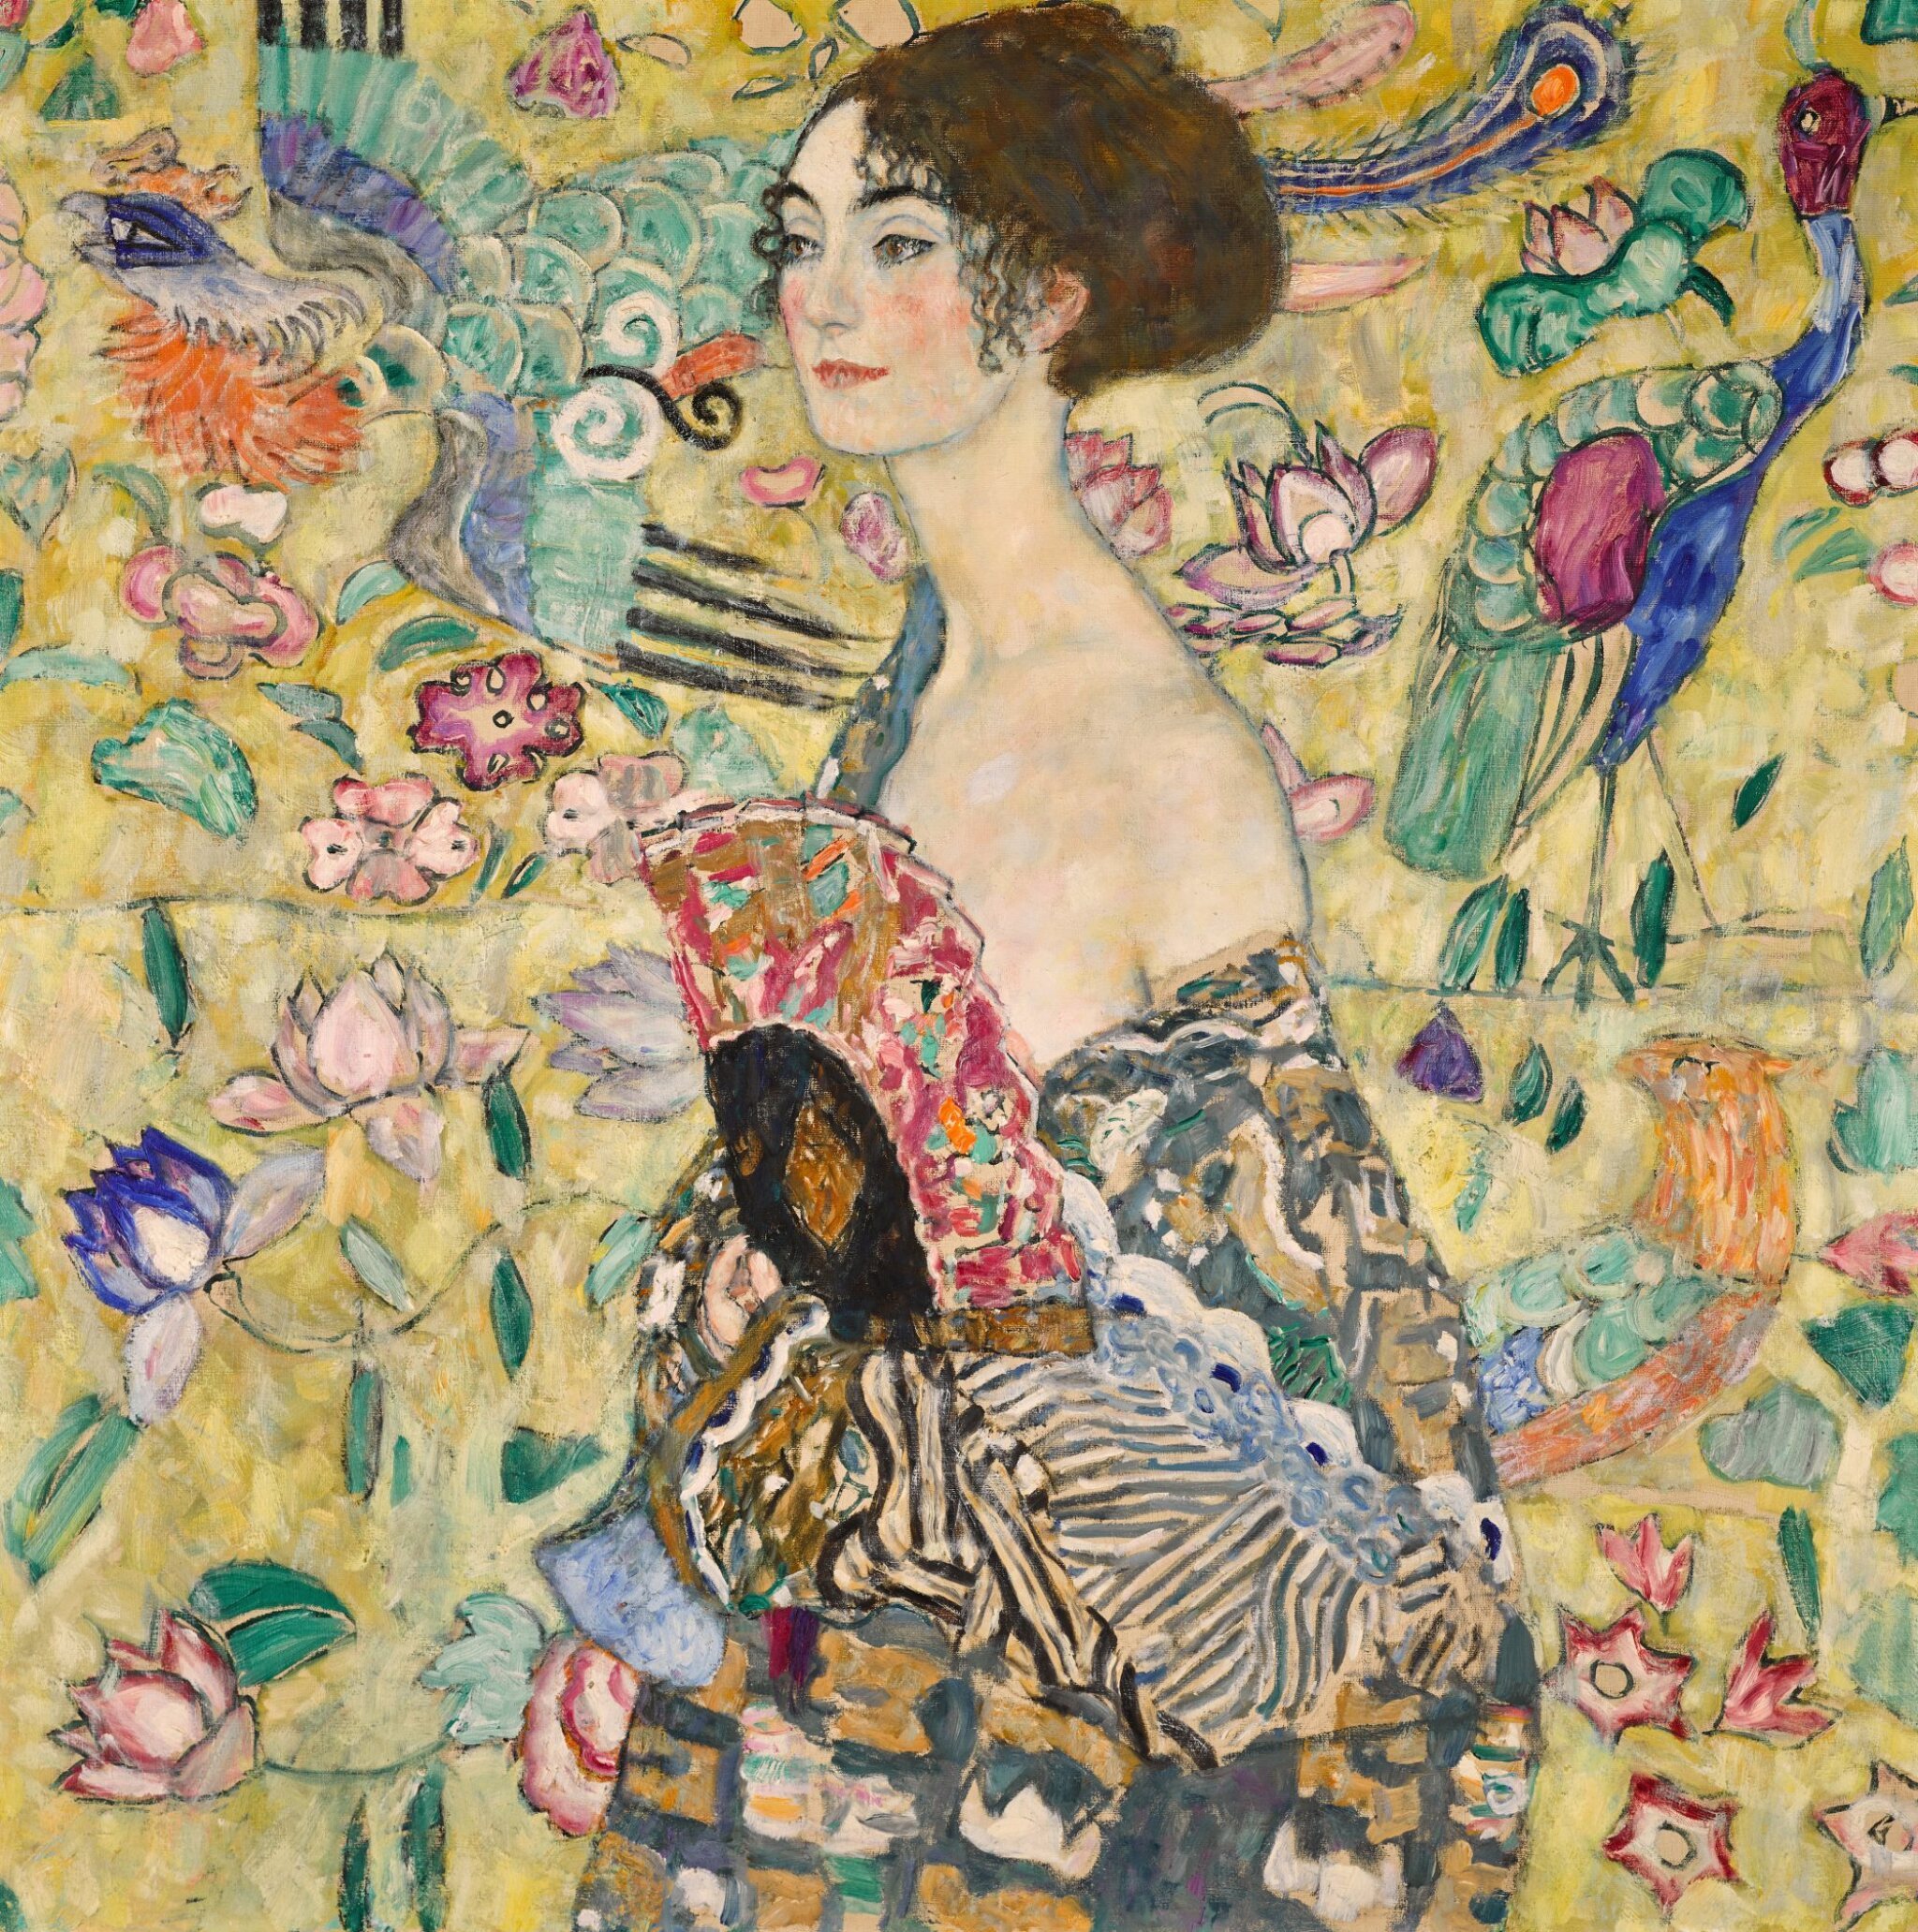 Lady With a Fan by Gustav Klimt - 1917-1918 - 100.2 x 100.2 cm private collection